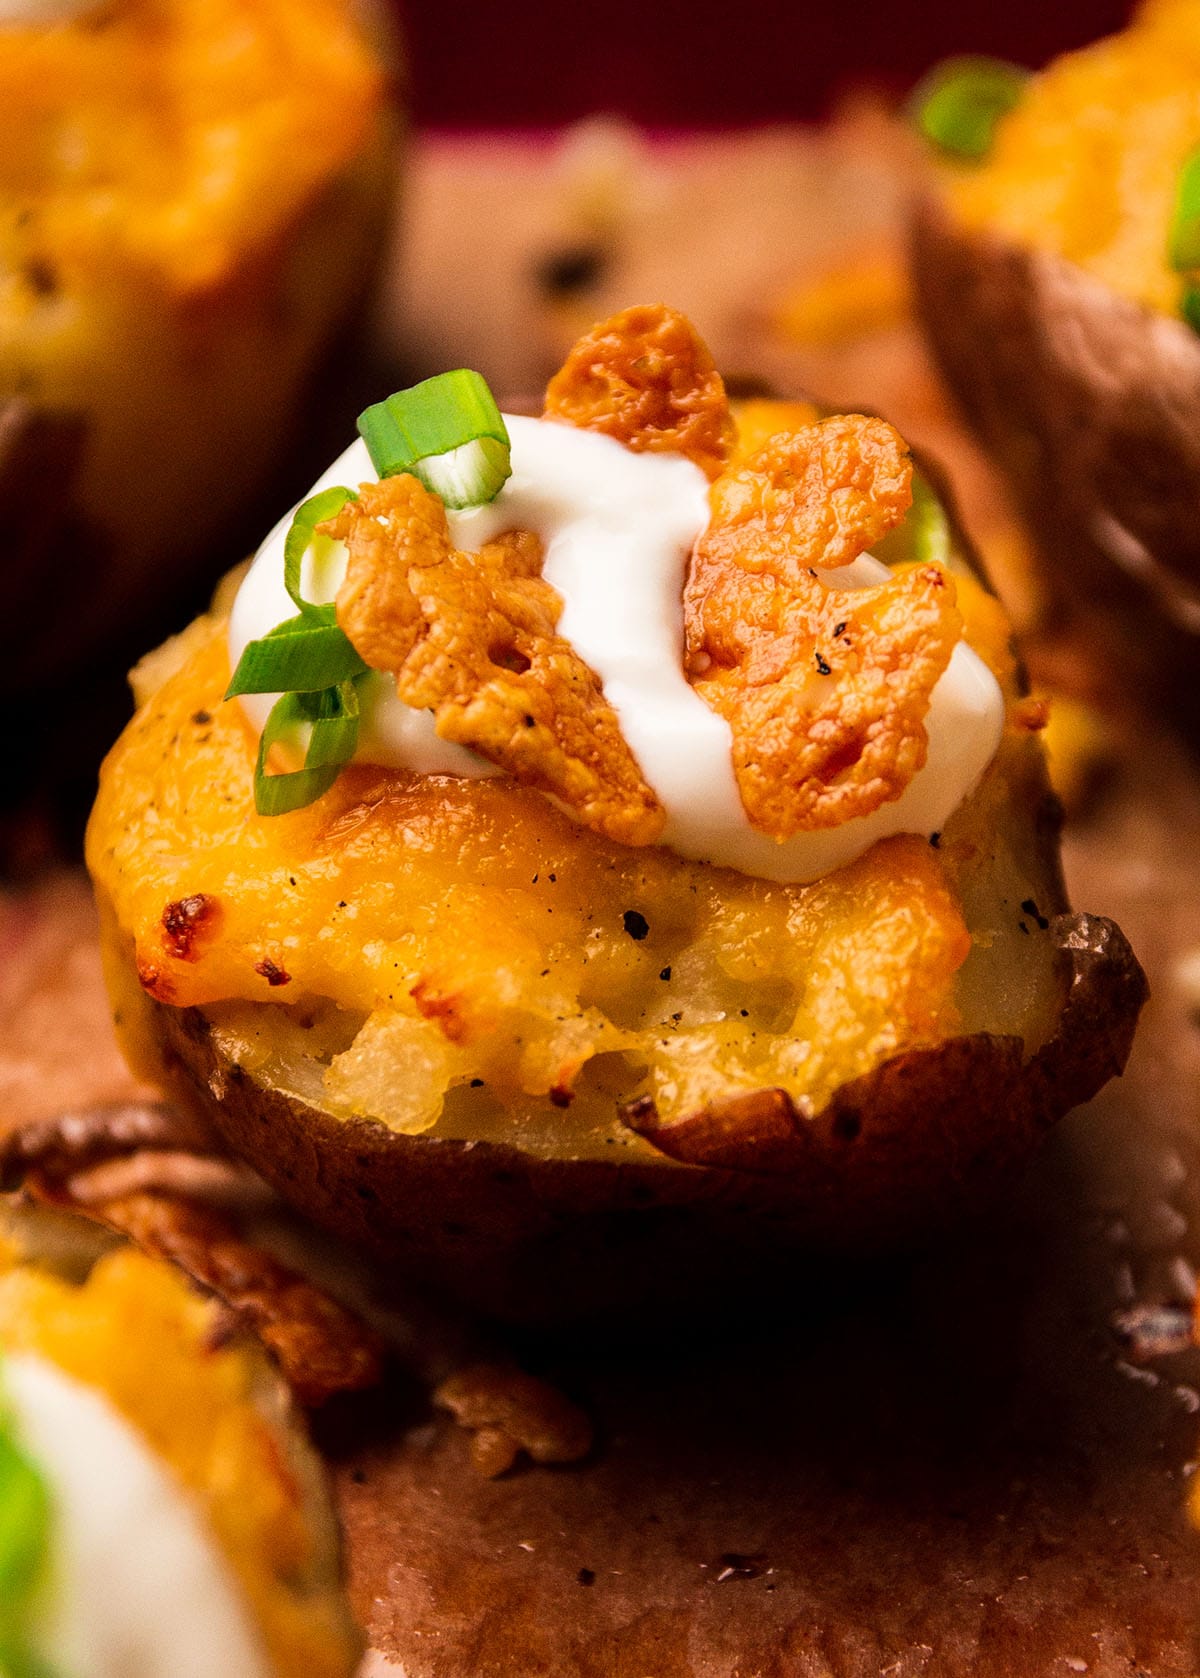 Topping twice baked potato with crispy cheese pieces.